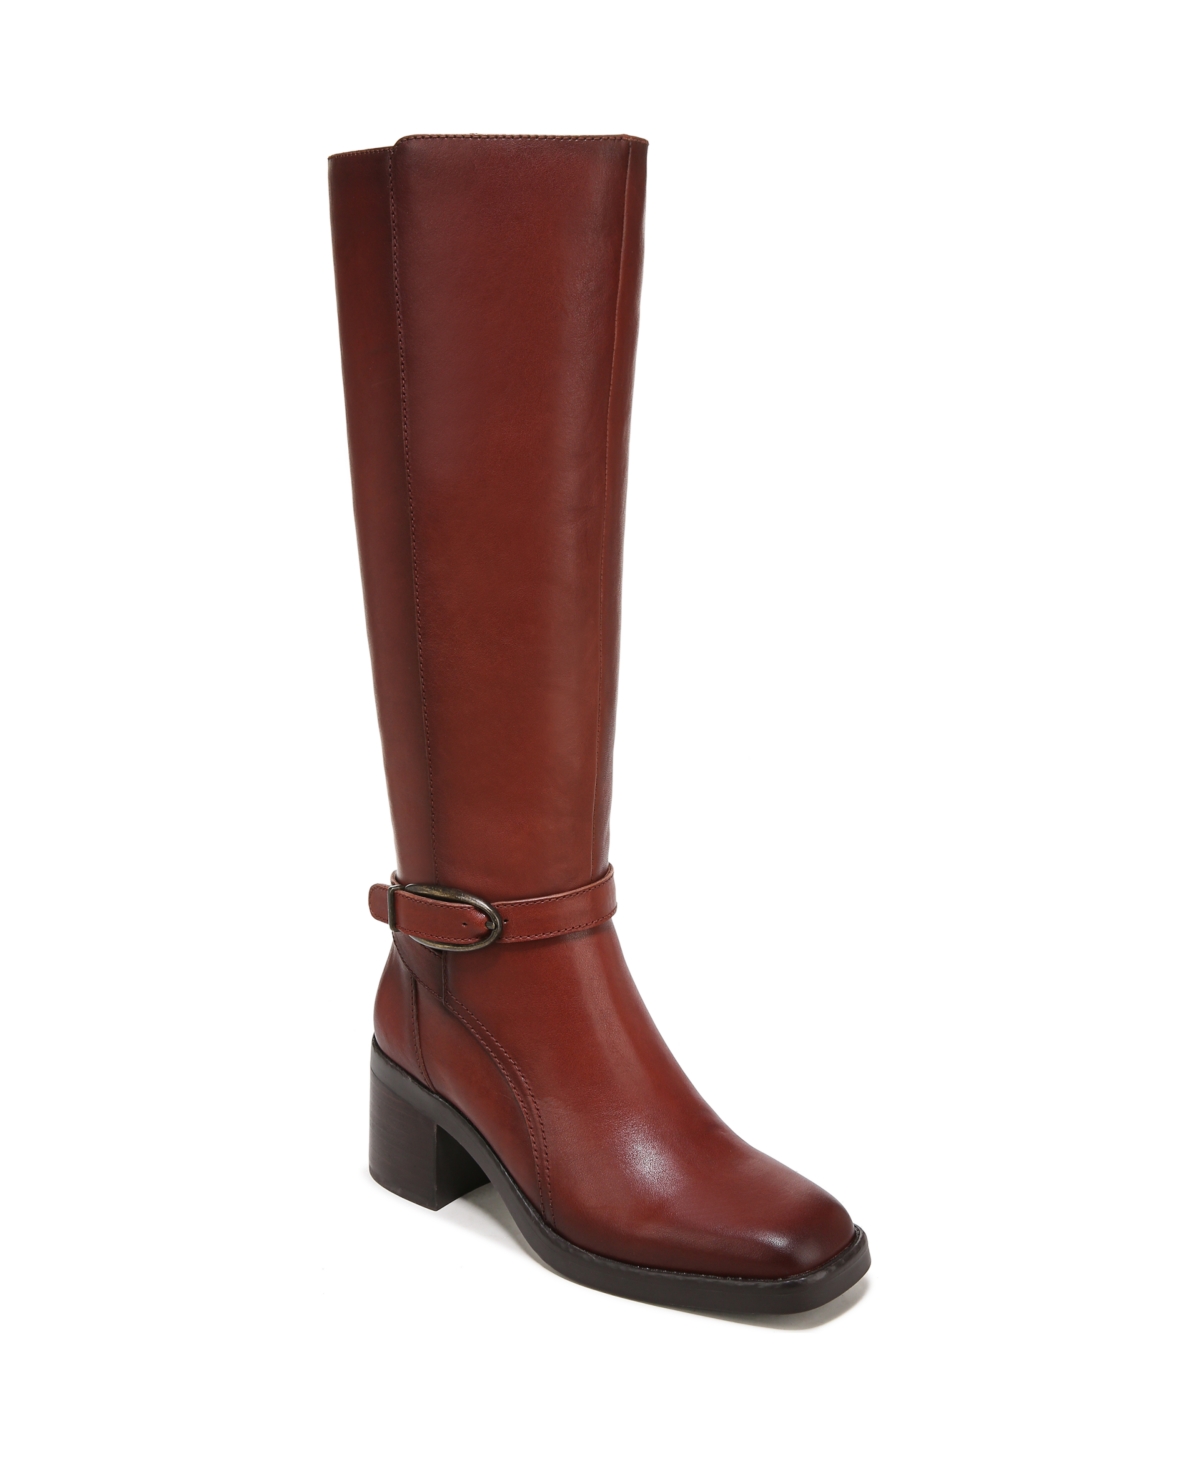 Naturalizer Elliot High Shaft Boots In Terra Cotta Leather